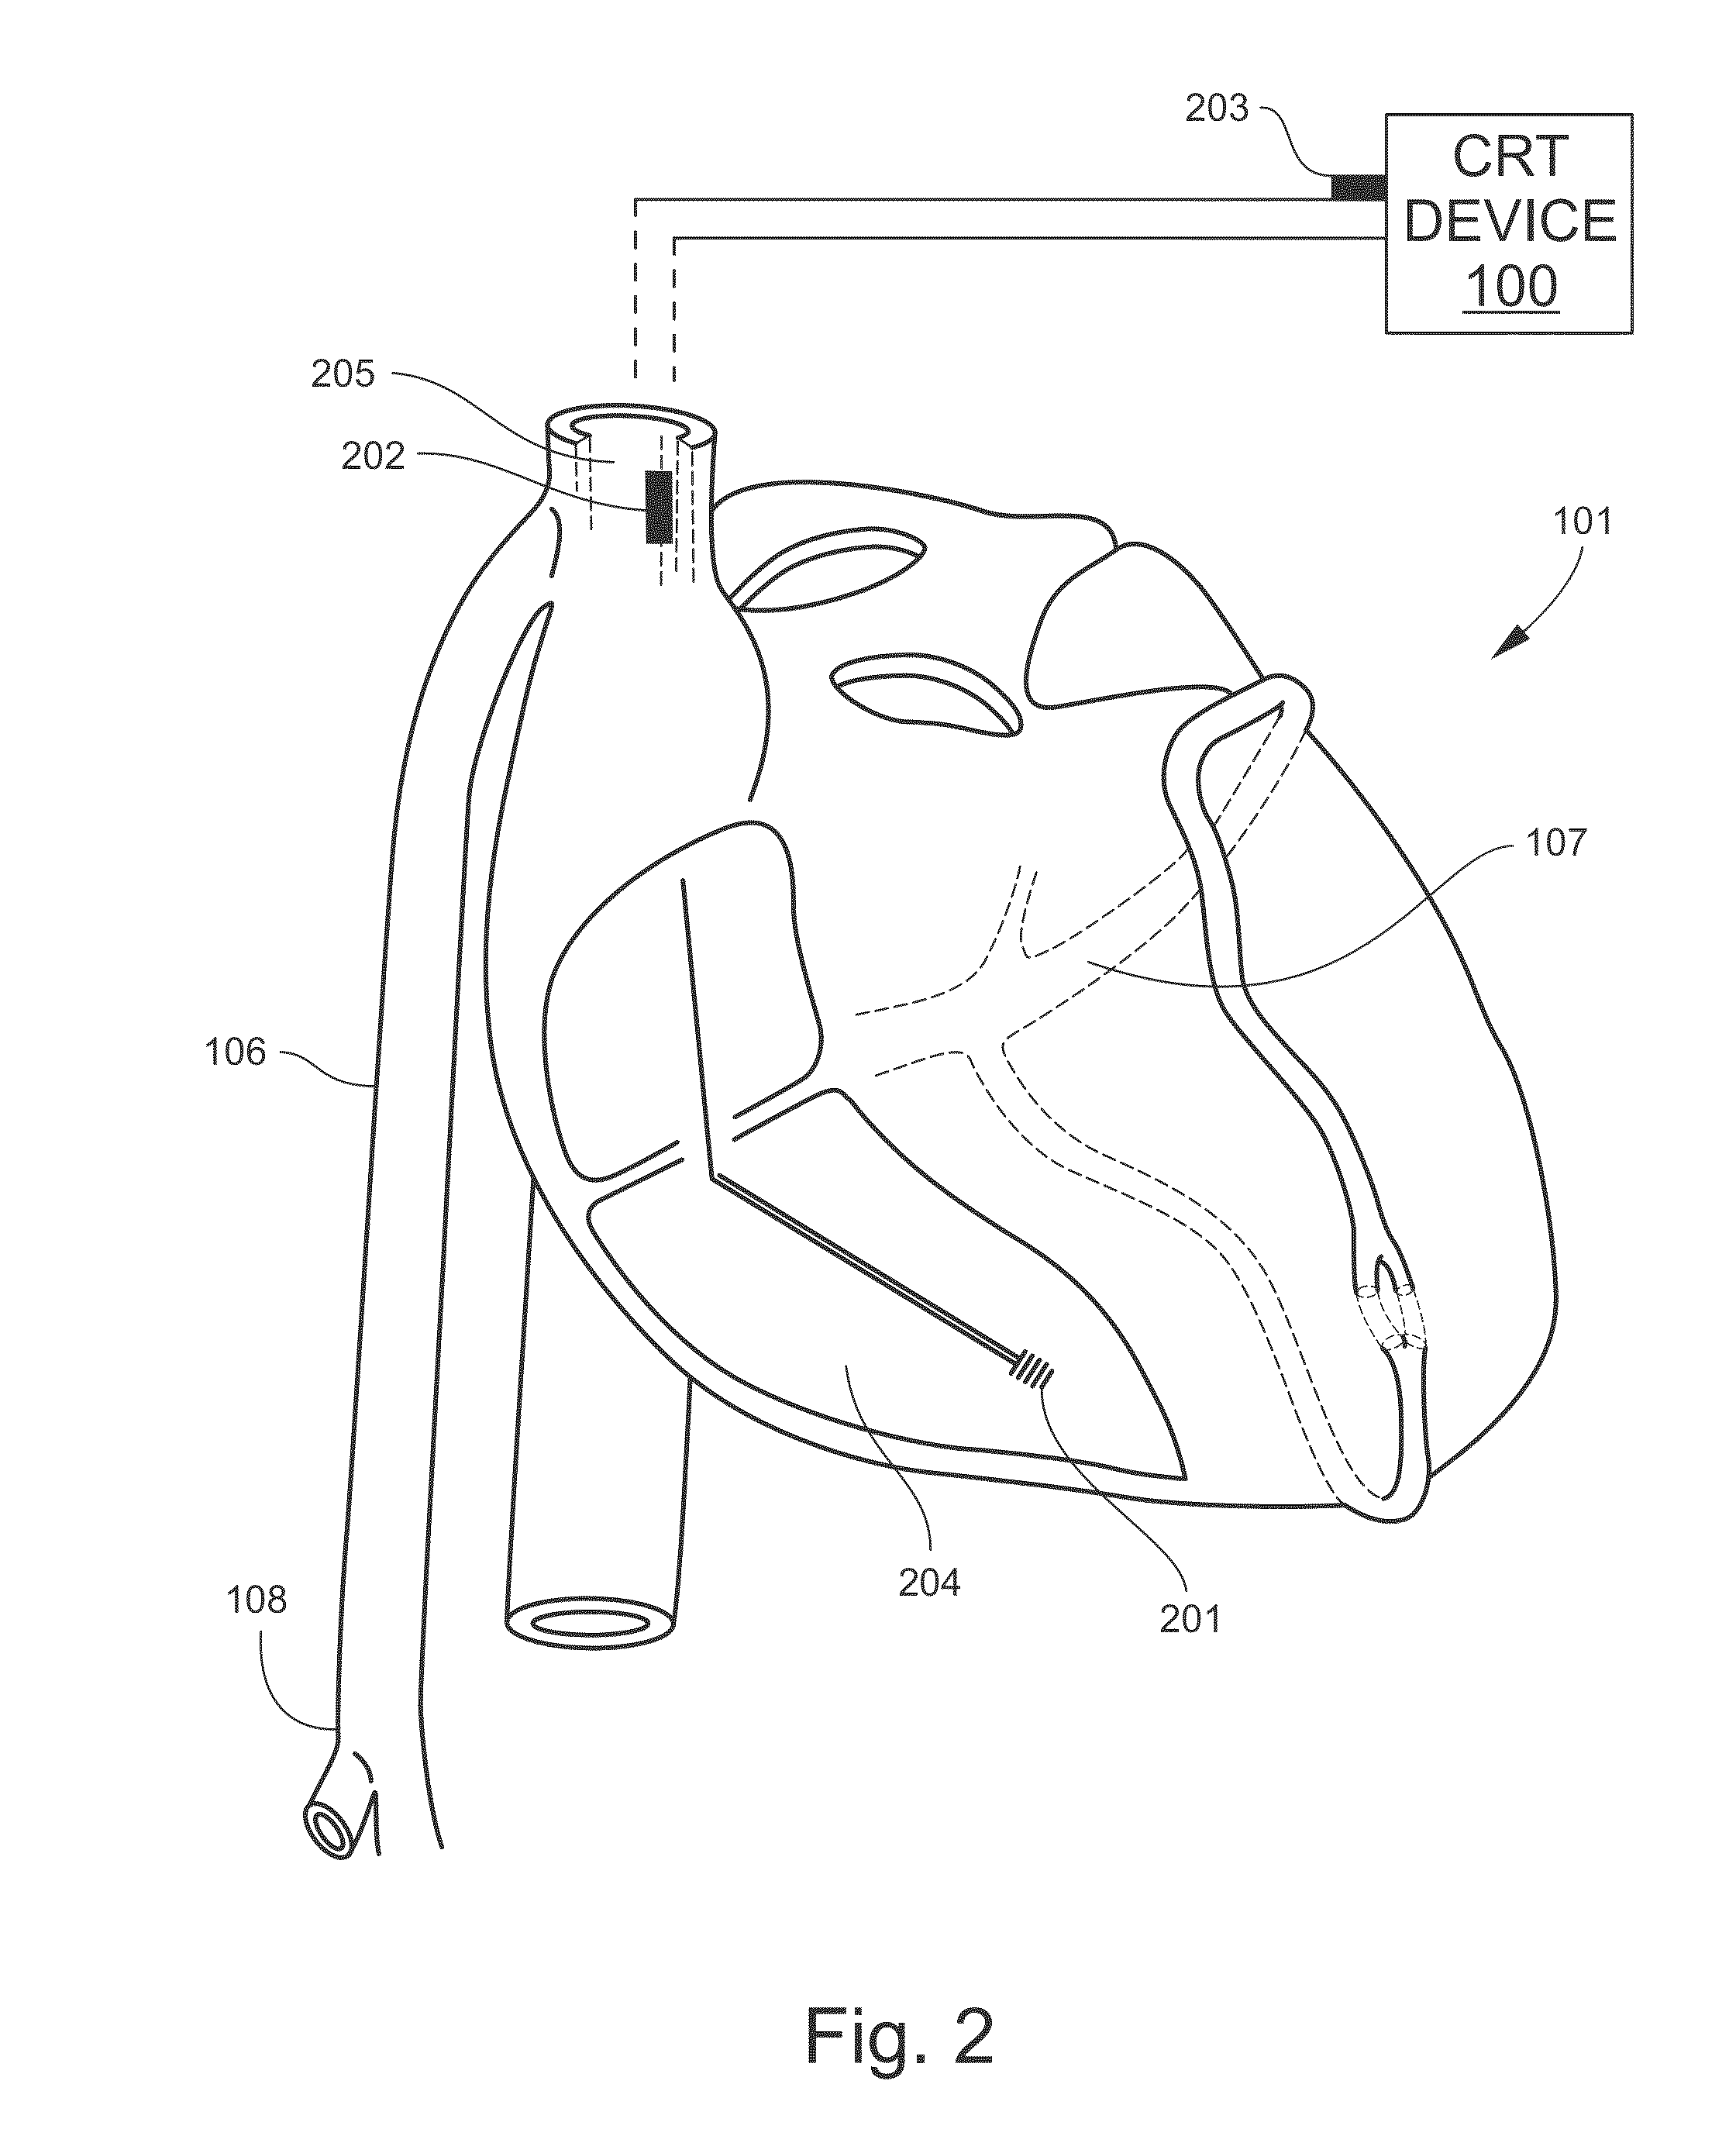 Systems and methods for optimizing cardiac resynchronization therapy (CRT)